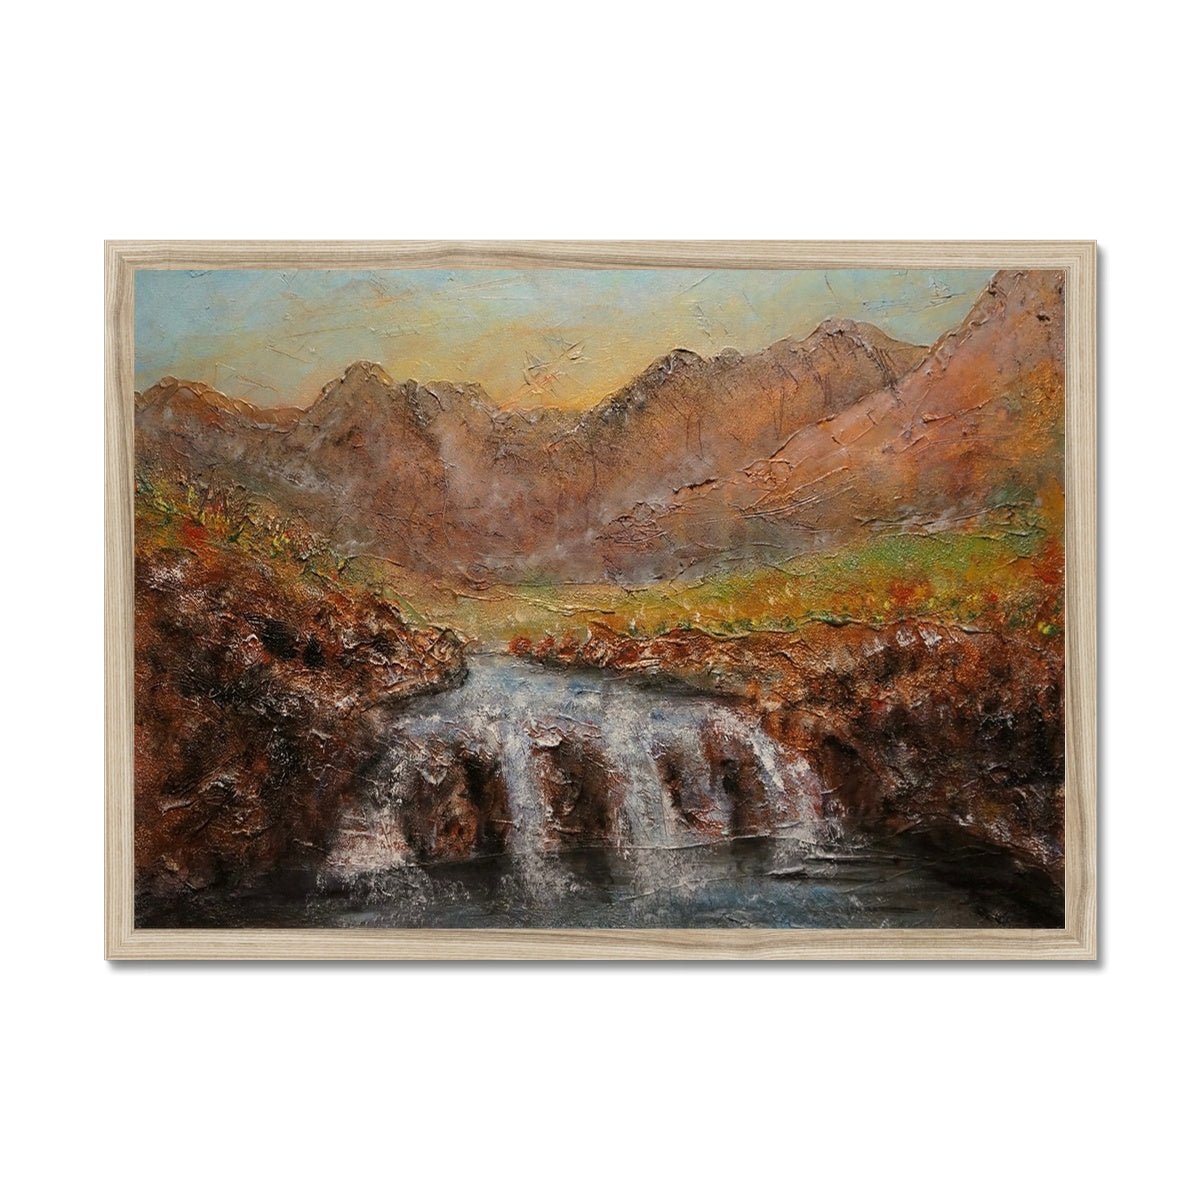 Fairy Pools Dawn Skye Painting | Framed Prints From Scotland-Framed Prints-Skye Art Gallery-A2 Landscape-Natural Frame-Paintings, Prints, Homeware, Art Gifts From Scotland By Scottish Artist Kevin Hunter